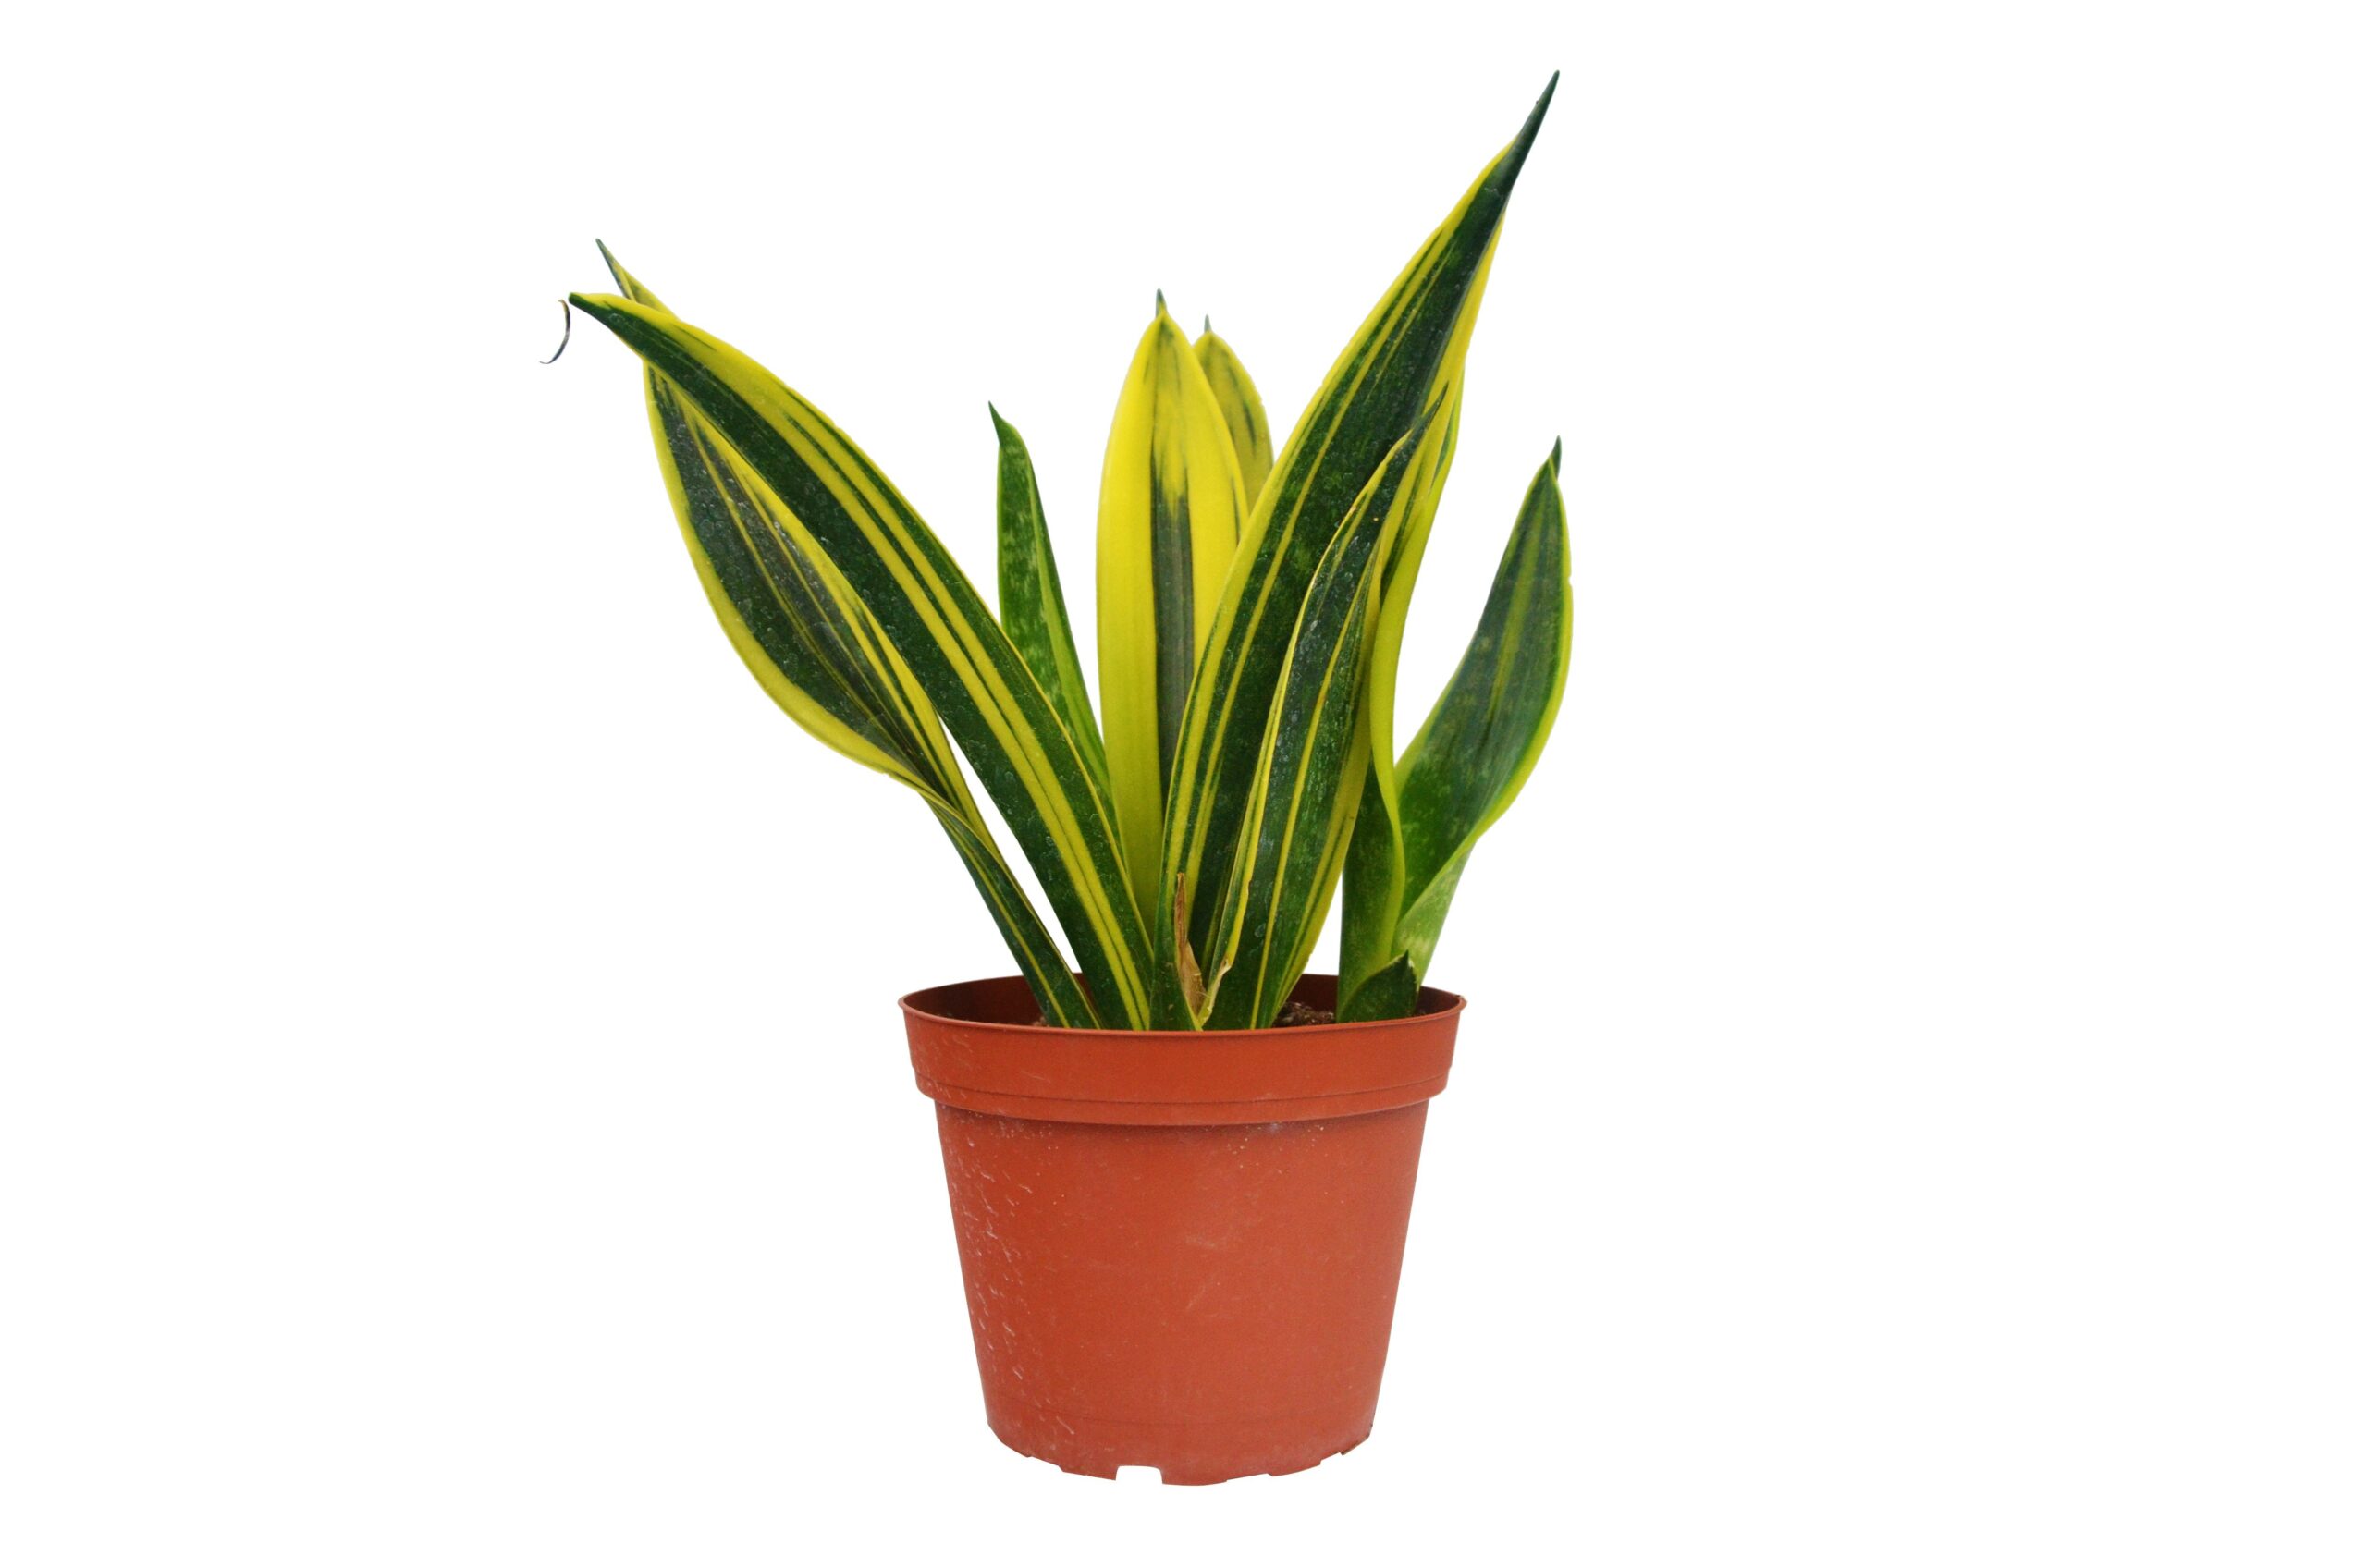 A yellow and green plant in a pot on a white background from one of the top plant nurseries near me.